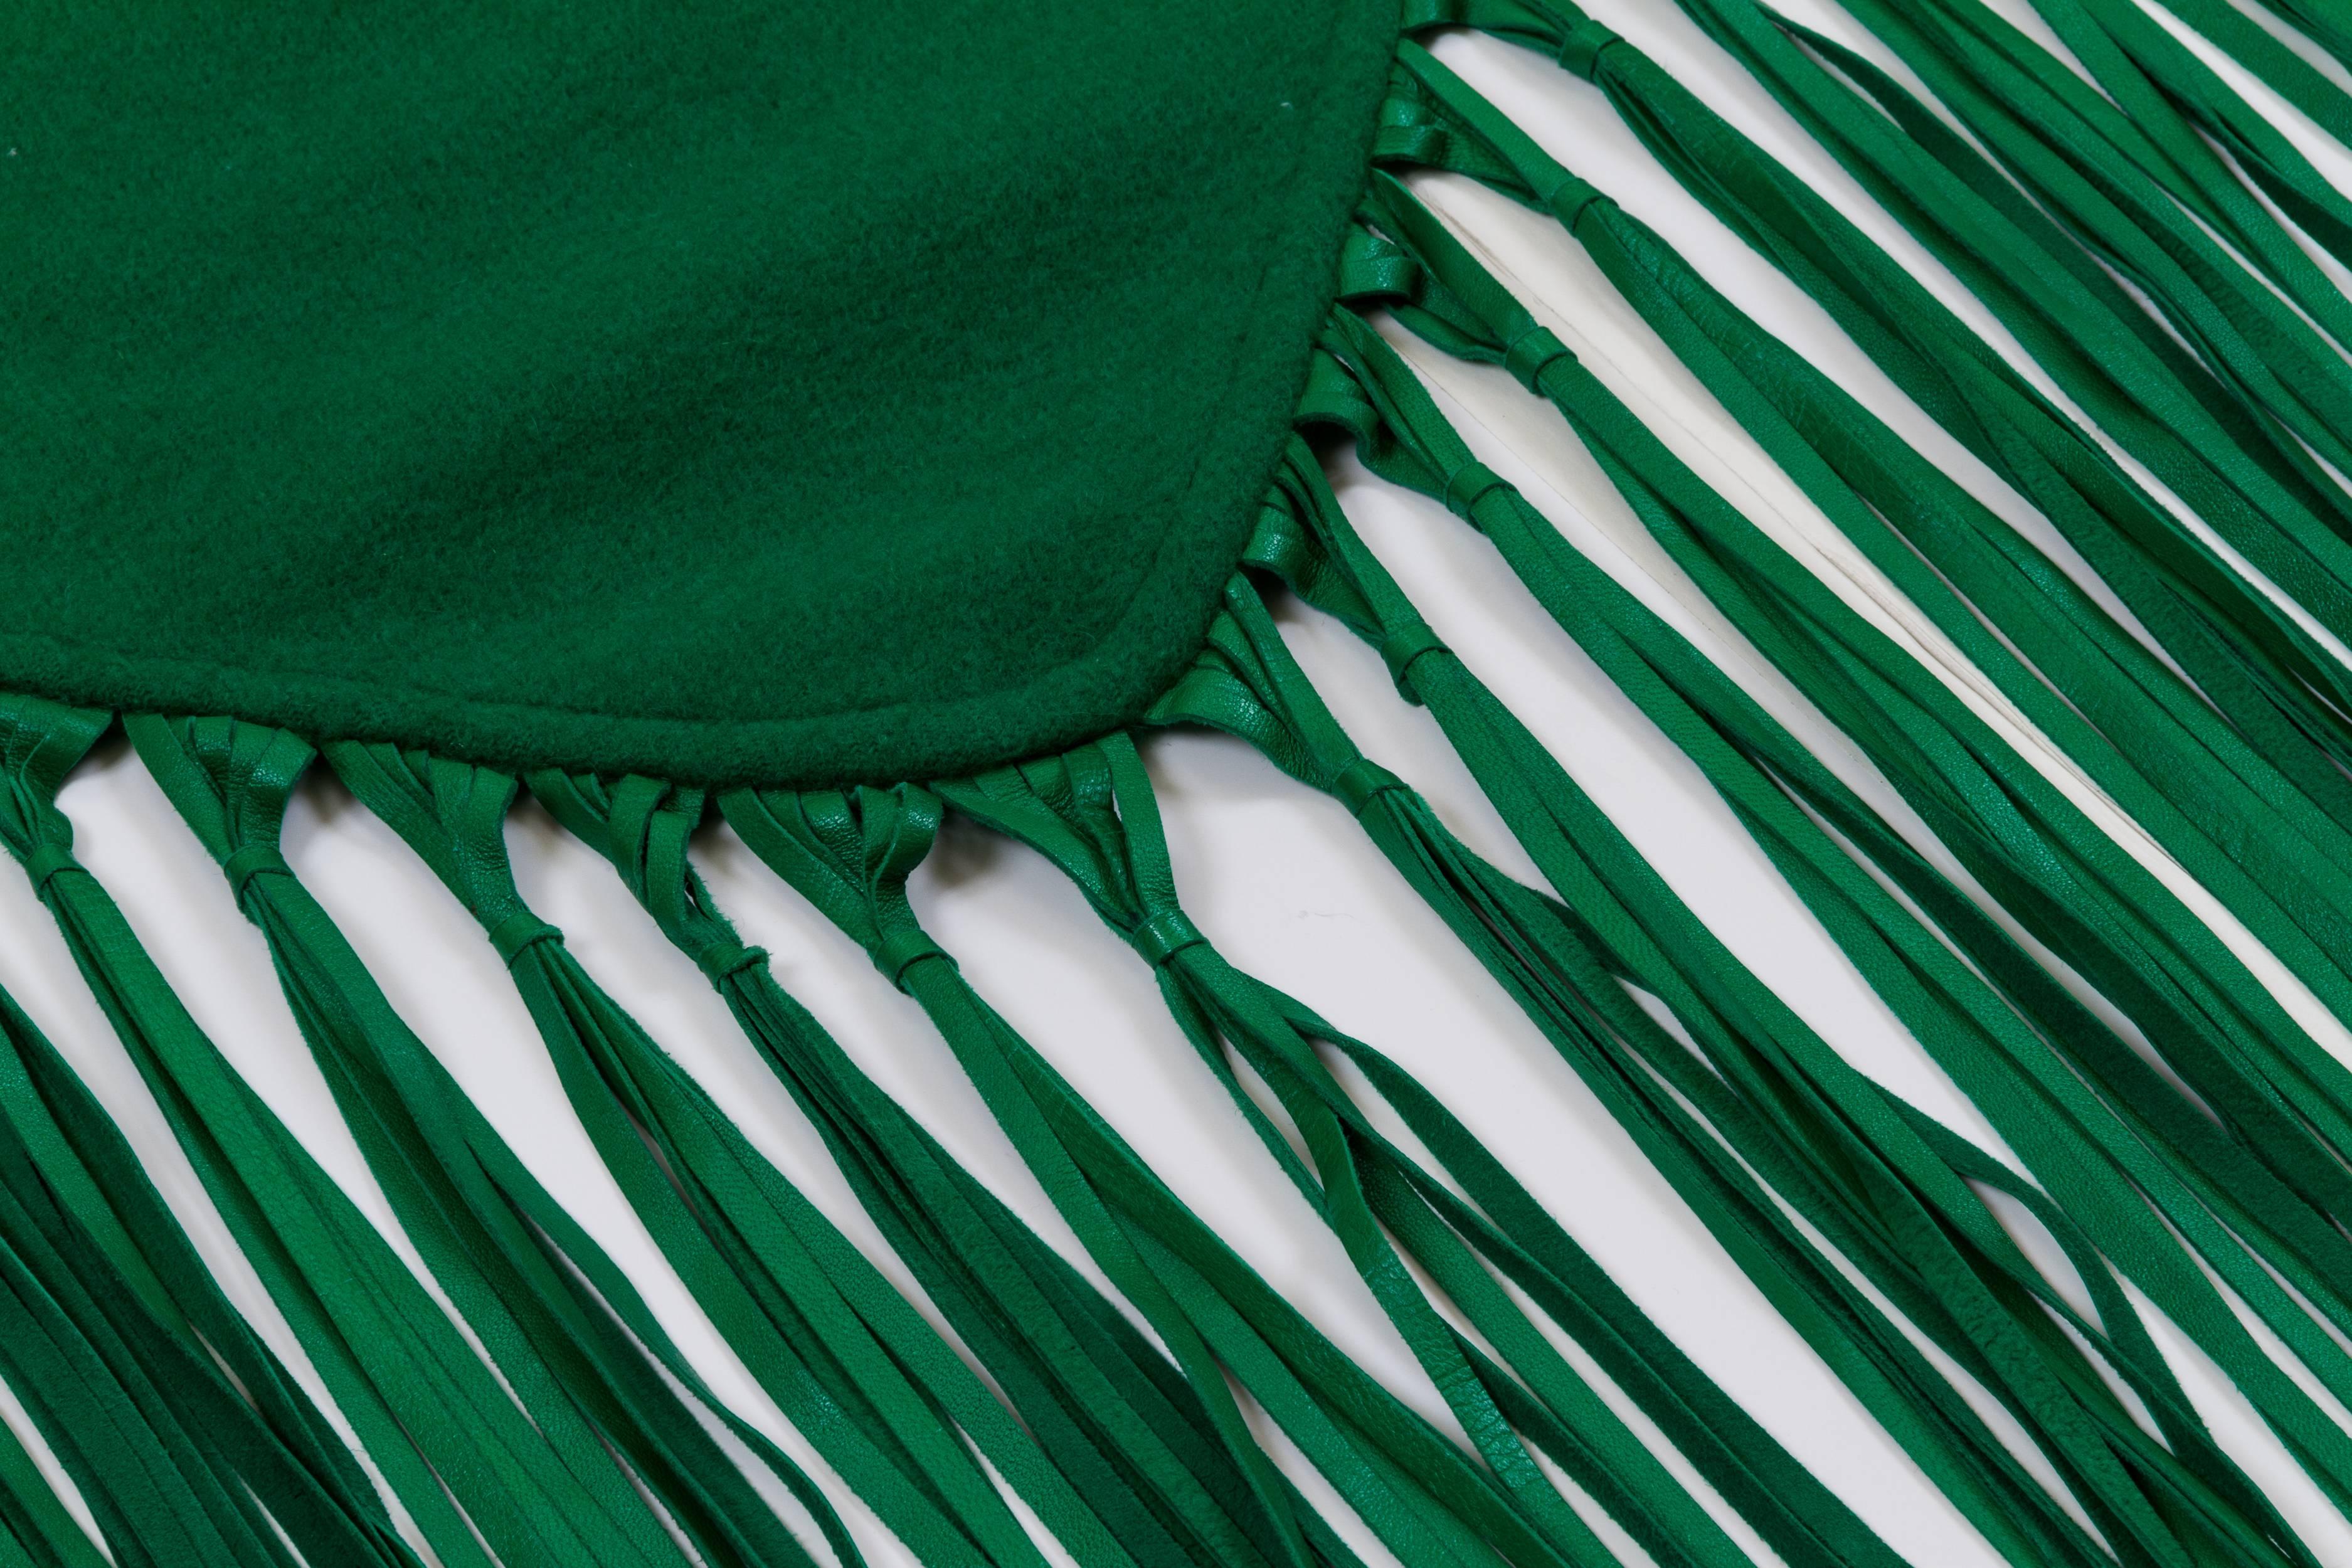 Hermès emerald green 100% cashmere shawl with lambskin fringe. Comes with original box.